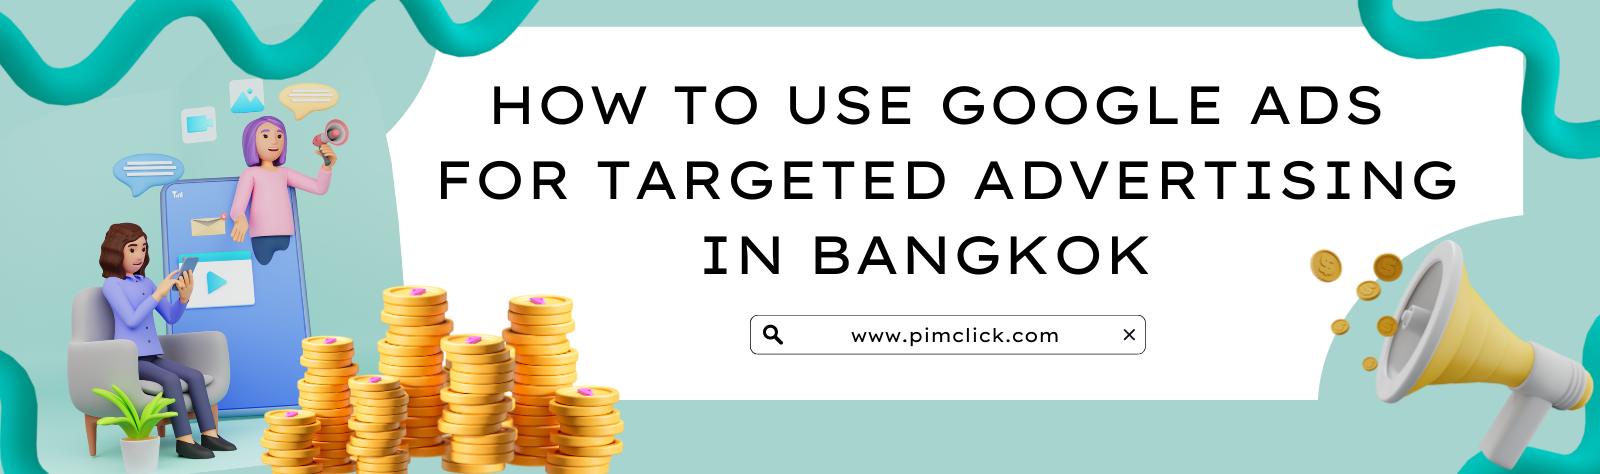 How to Use Google Ads for Targeted Advertising in Bangkok